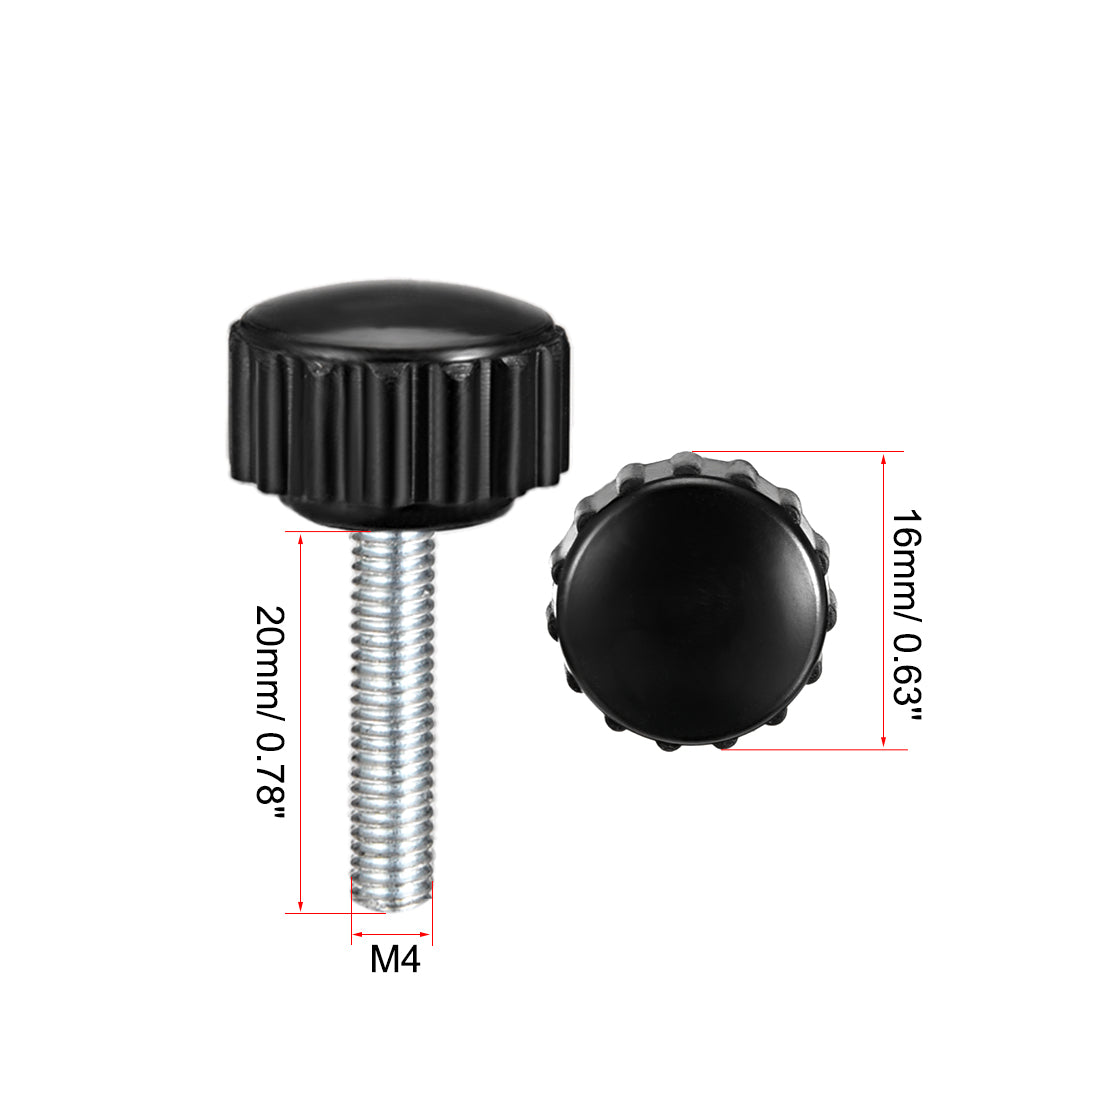 Uxcell Uxcell M5 x 40mm Male Thread Knurled Clamping Knobs Grip Thumb Screw on Type  4 Pcs